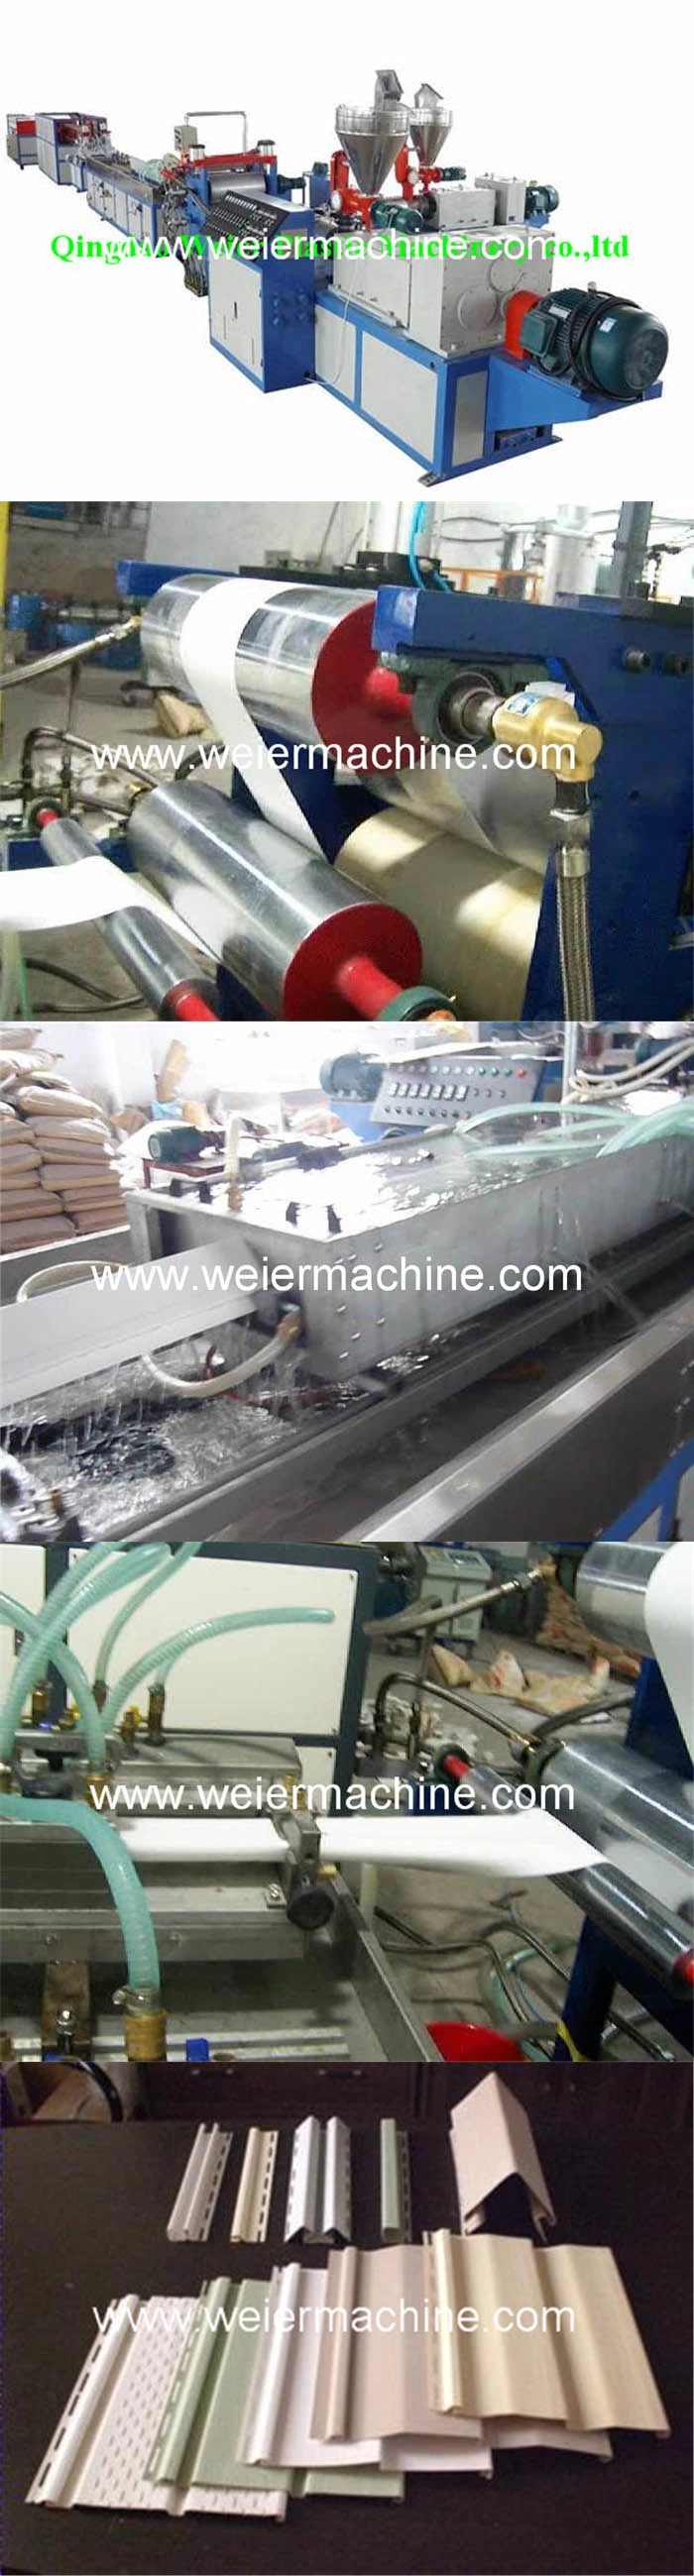 PVC Plastic Outside Siding Wall Panel Plate Board Extrusion Machine From 15 Years Factory